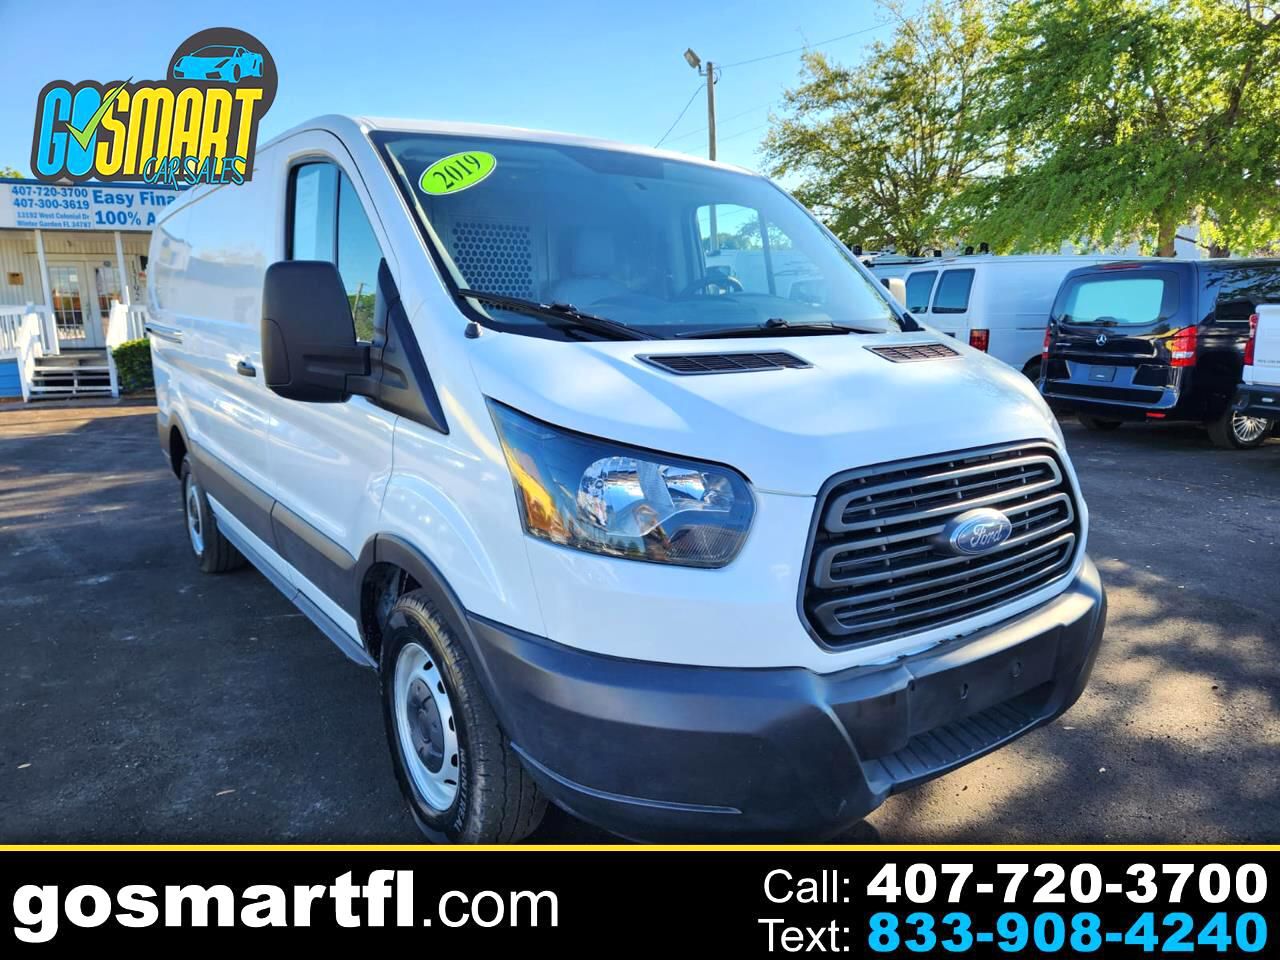 2019 Ford Transit for Sale in Oakland, FL - OfferUp